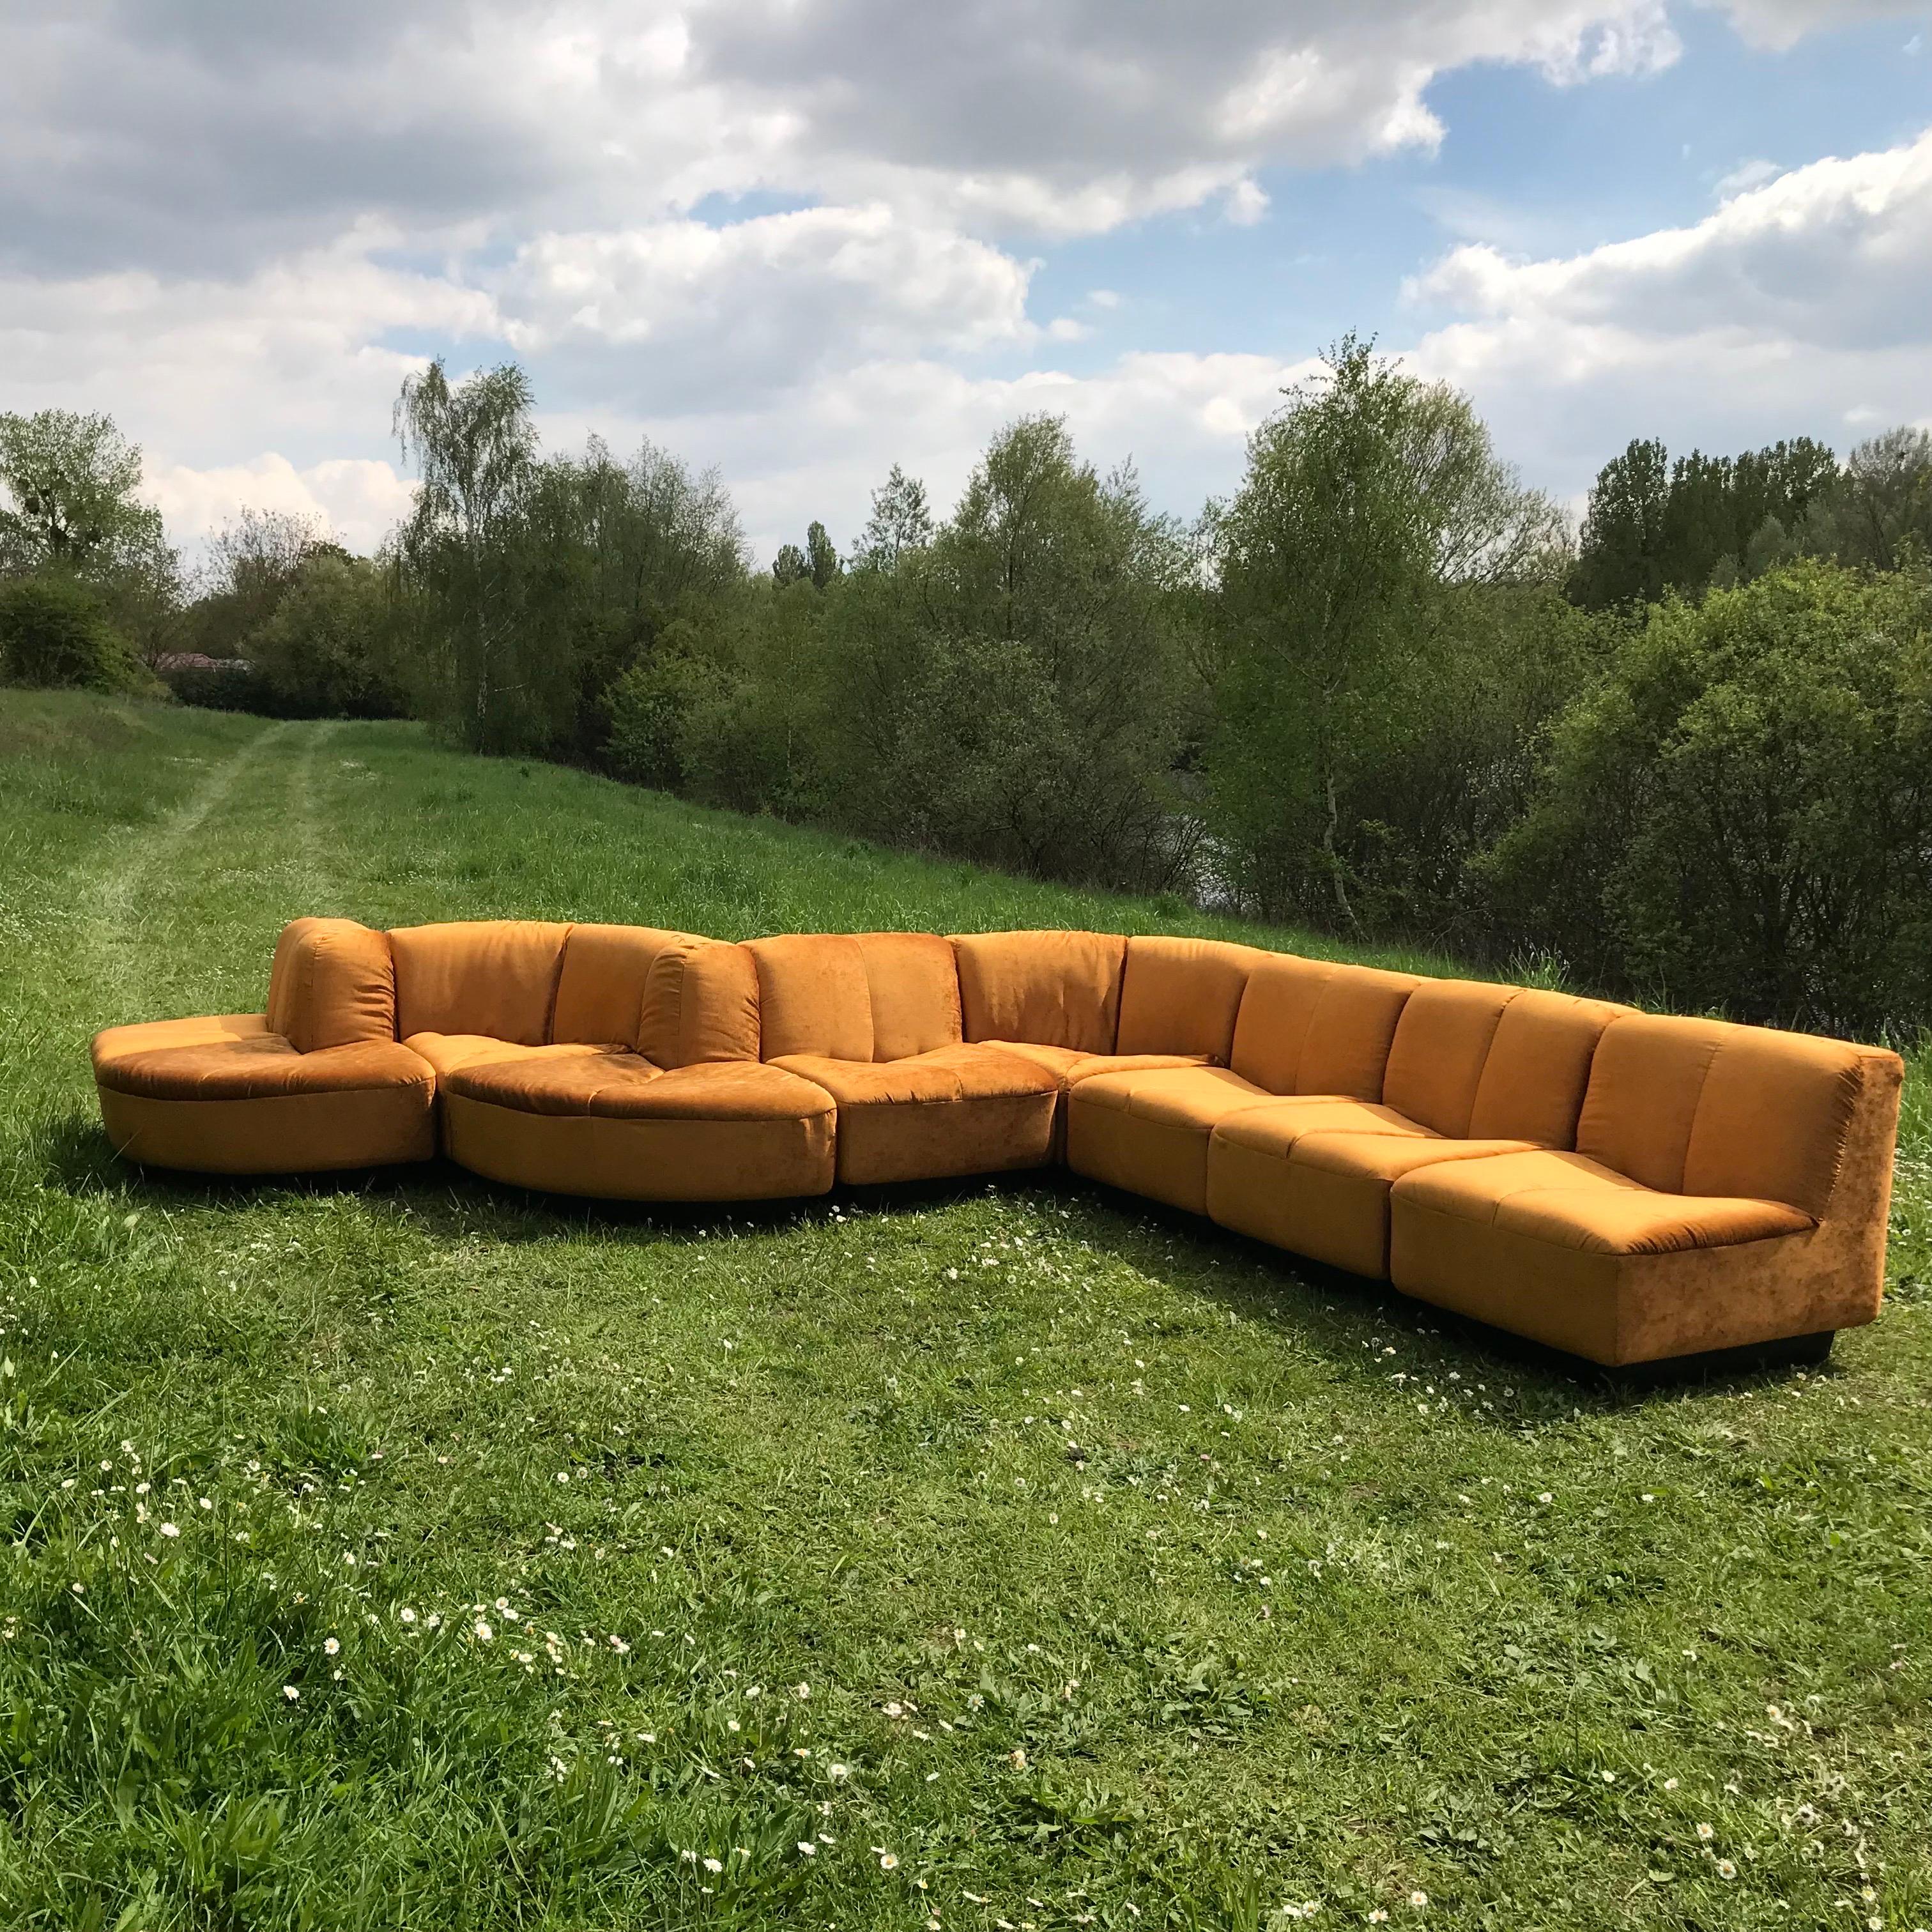 French modular sofa from the 70s, set of 9 seats,
Entirely reupholsteured in a caramel velvet jab
 
Many shapes are possible 
You can set it up in different ways
Very elegant and confortable 